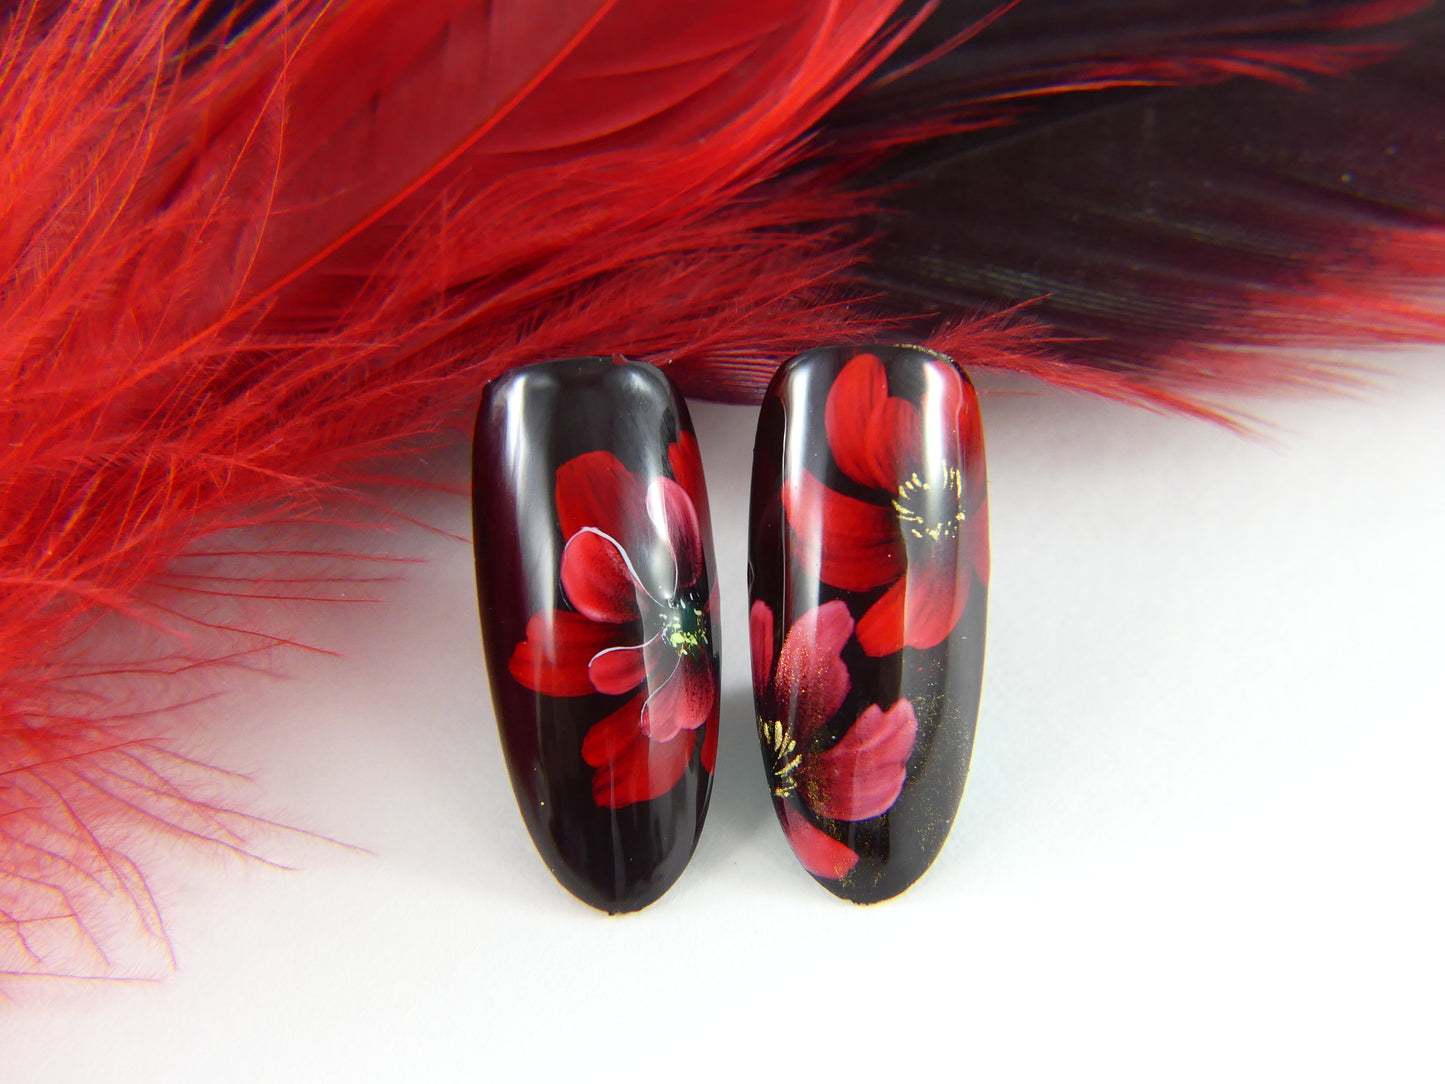 Load image into Gallery viewer, So Jelly Gel Polish - Red - My Little Nail Art Shop
